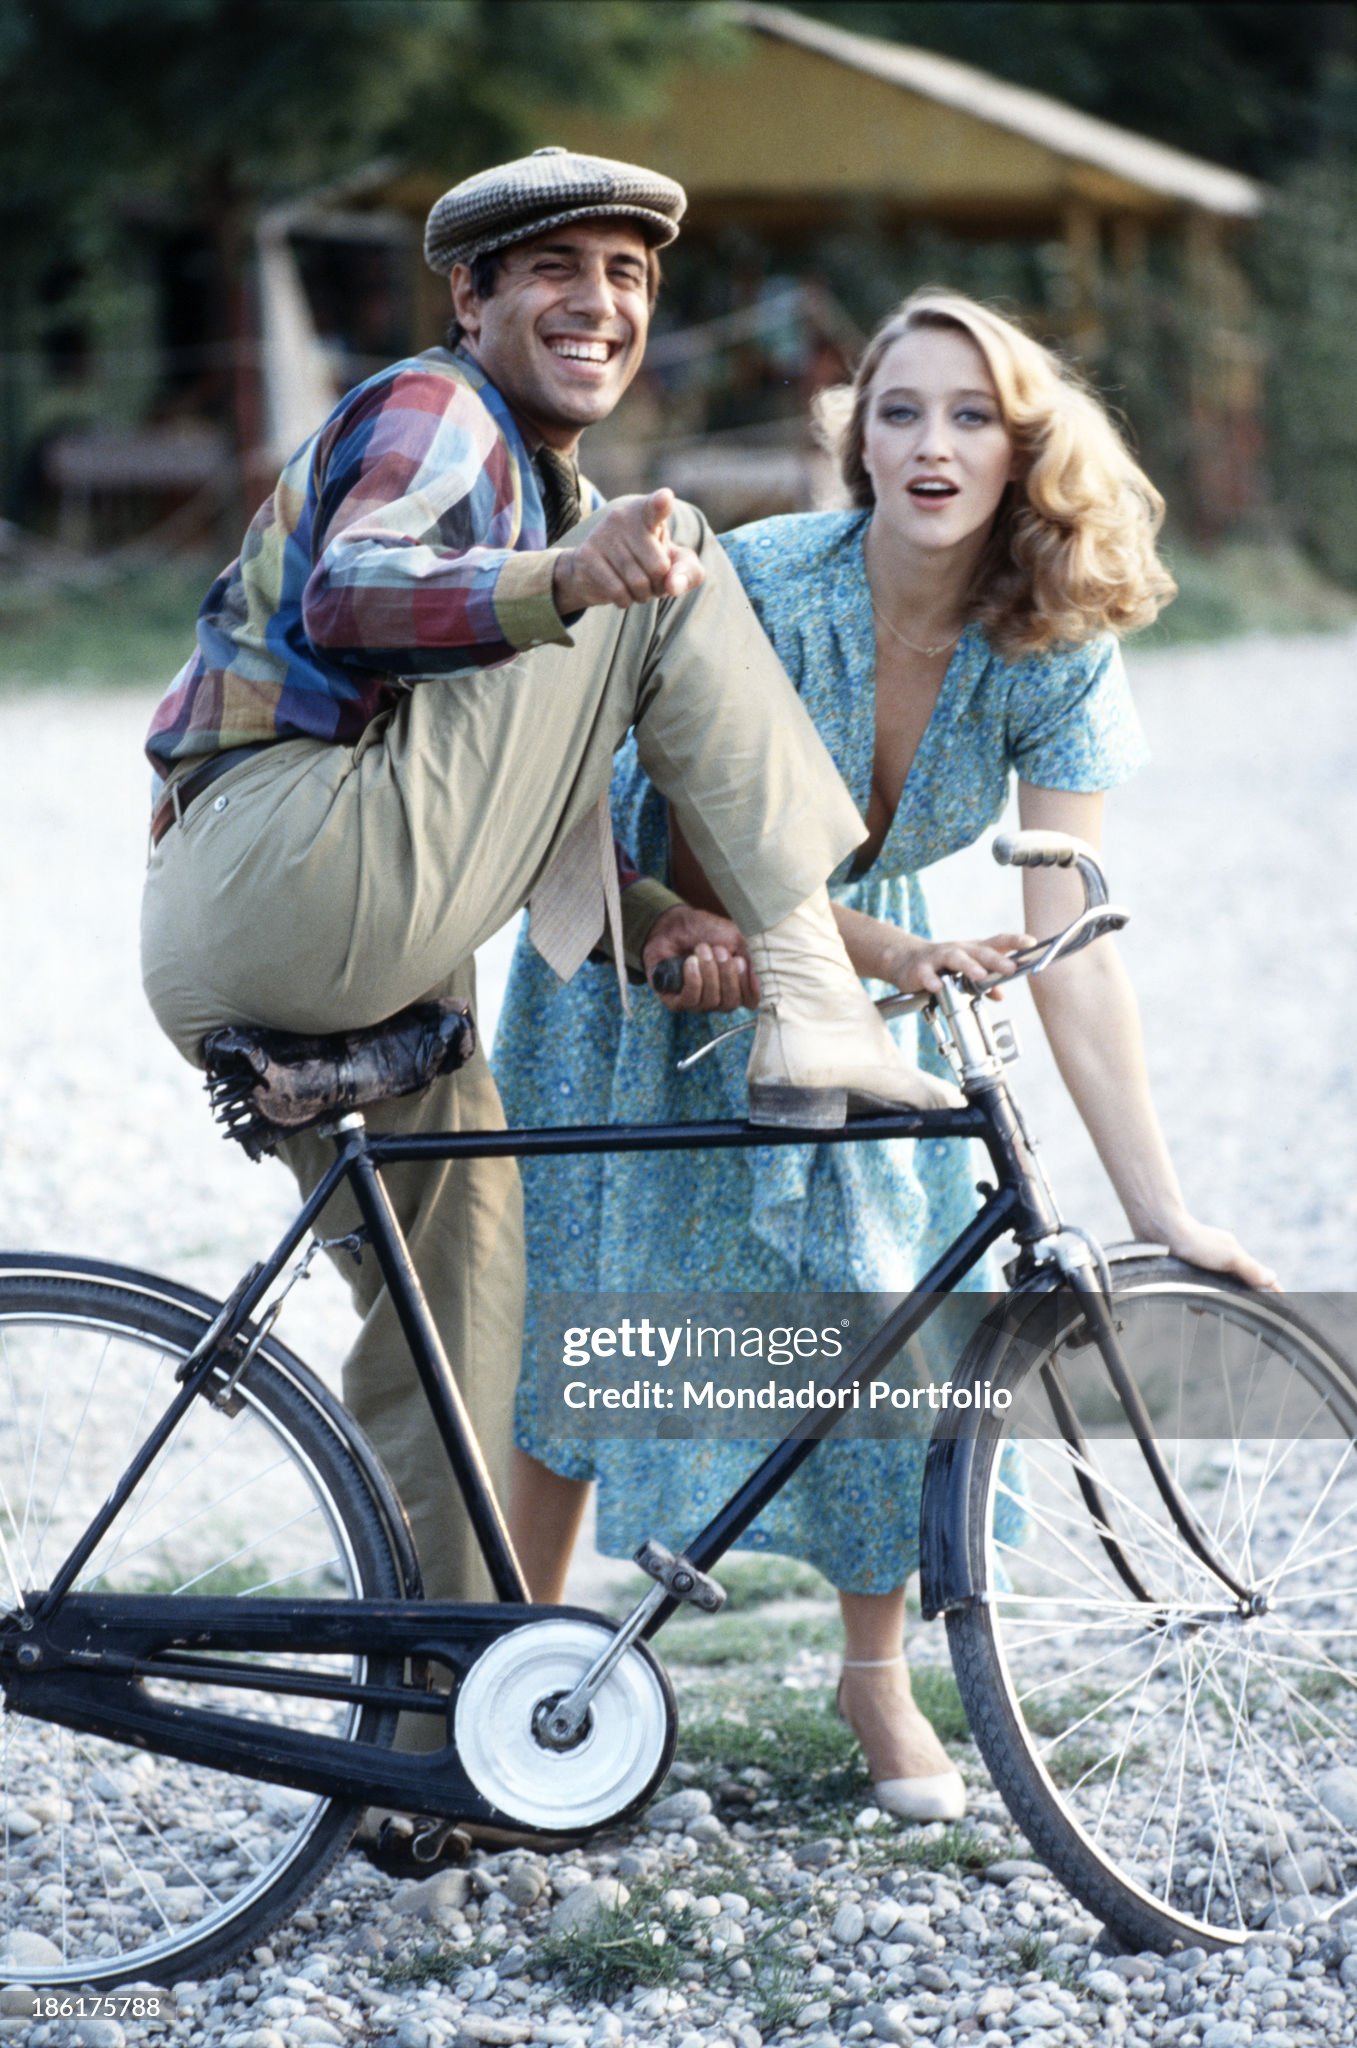 Adriano Celentano getting off a bicycle and laughing while Italian actress Eleonora Giorgi looking into the camera on the set of the film Velvet hands in Milan in 1979. 